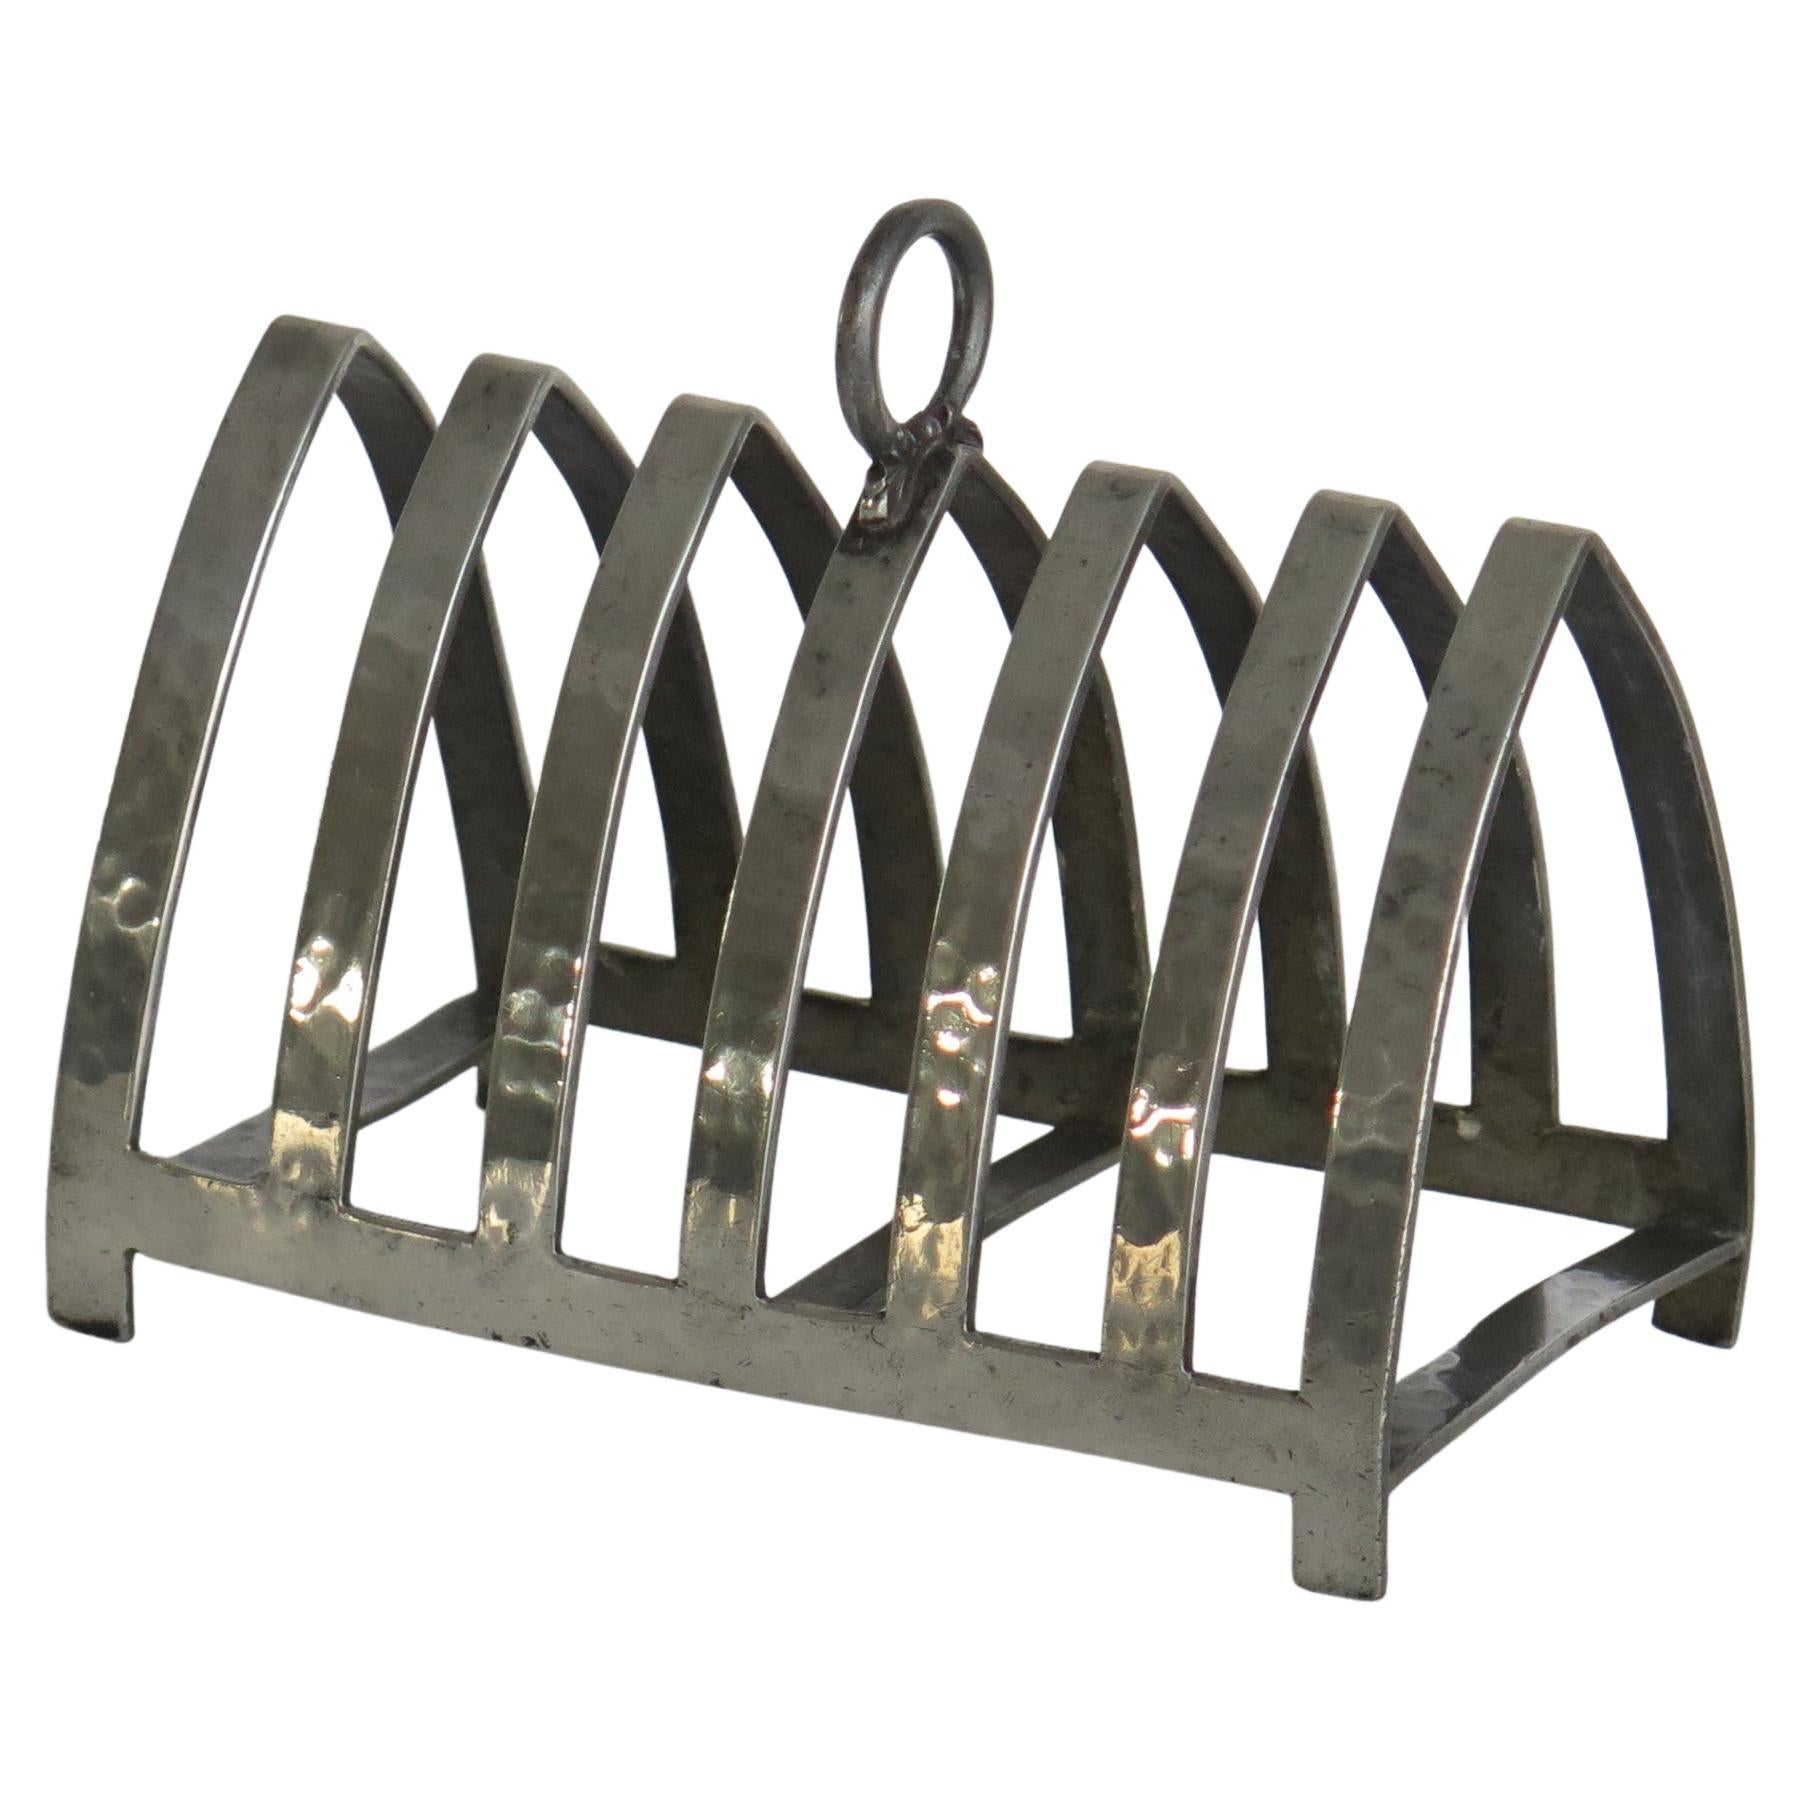 Art Deco Hammered Pewter Toast Rack by Connells of London, circa 1925